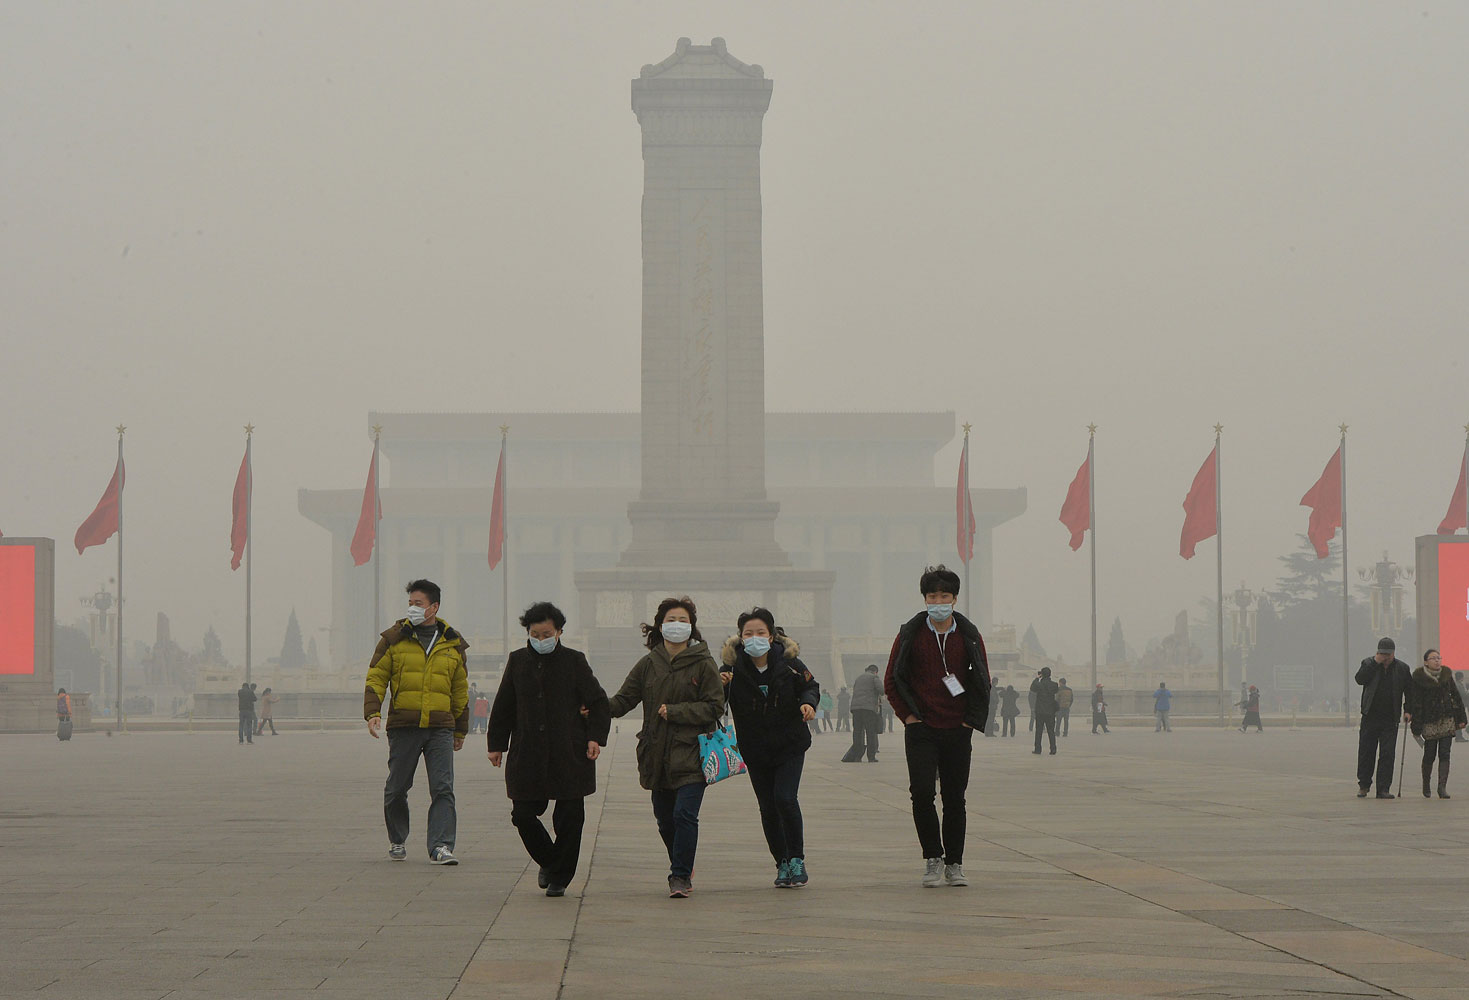 People wearing face masks visit Tiananmen Square as heavy air pollution shrouds Beijing on Feb. 26, 2014. (Mark Ralston—AFP/Getty Images)